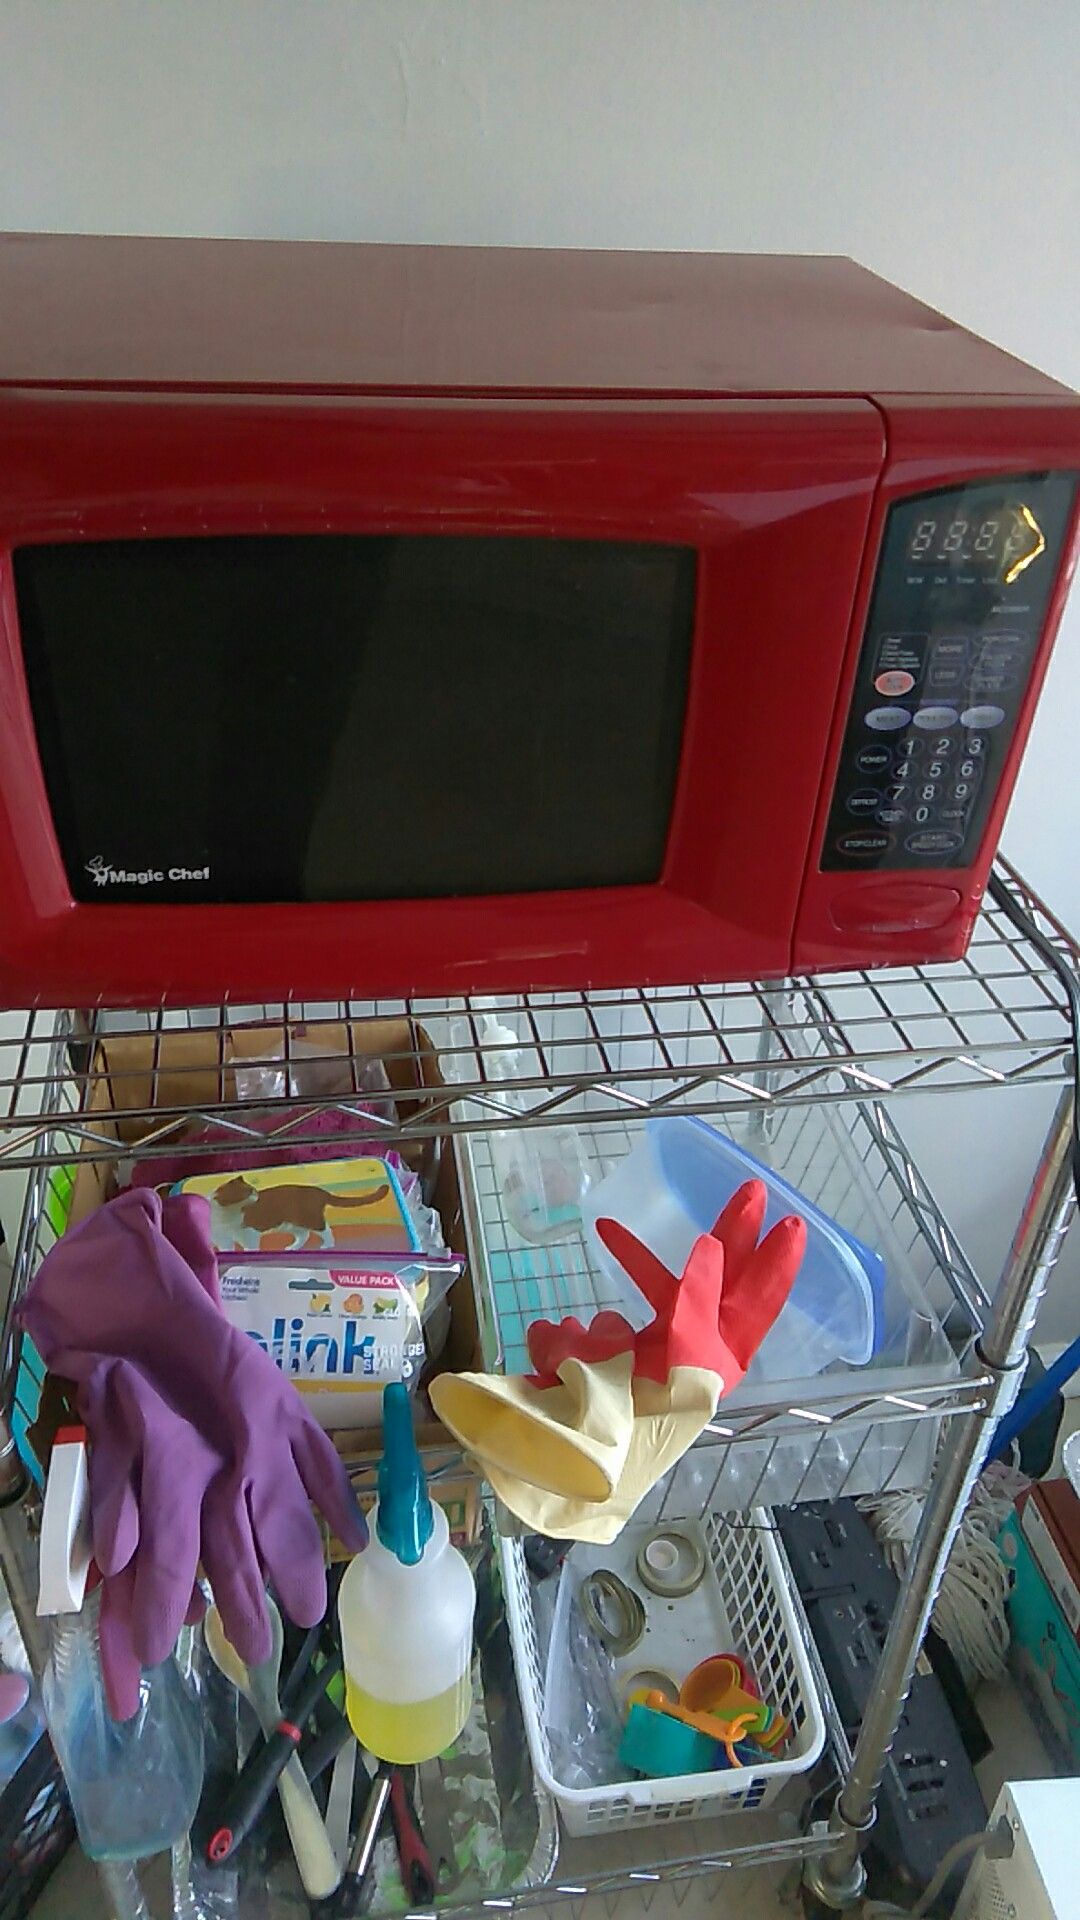 Red magic chef microwave for sale